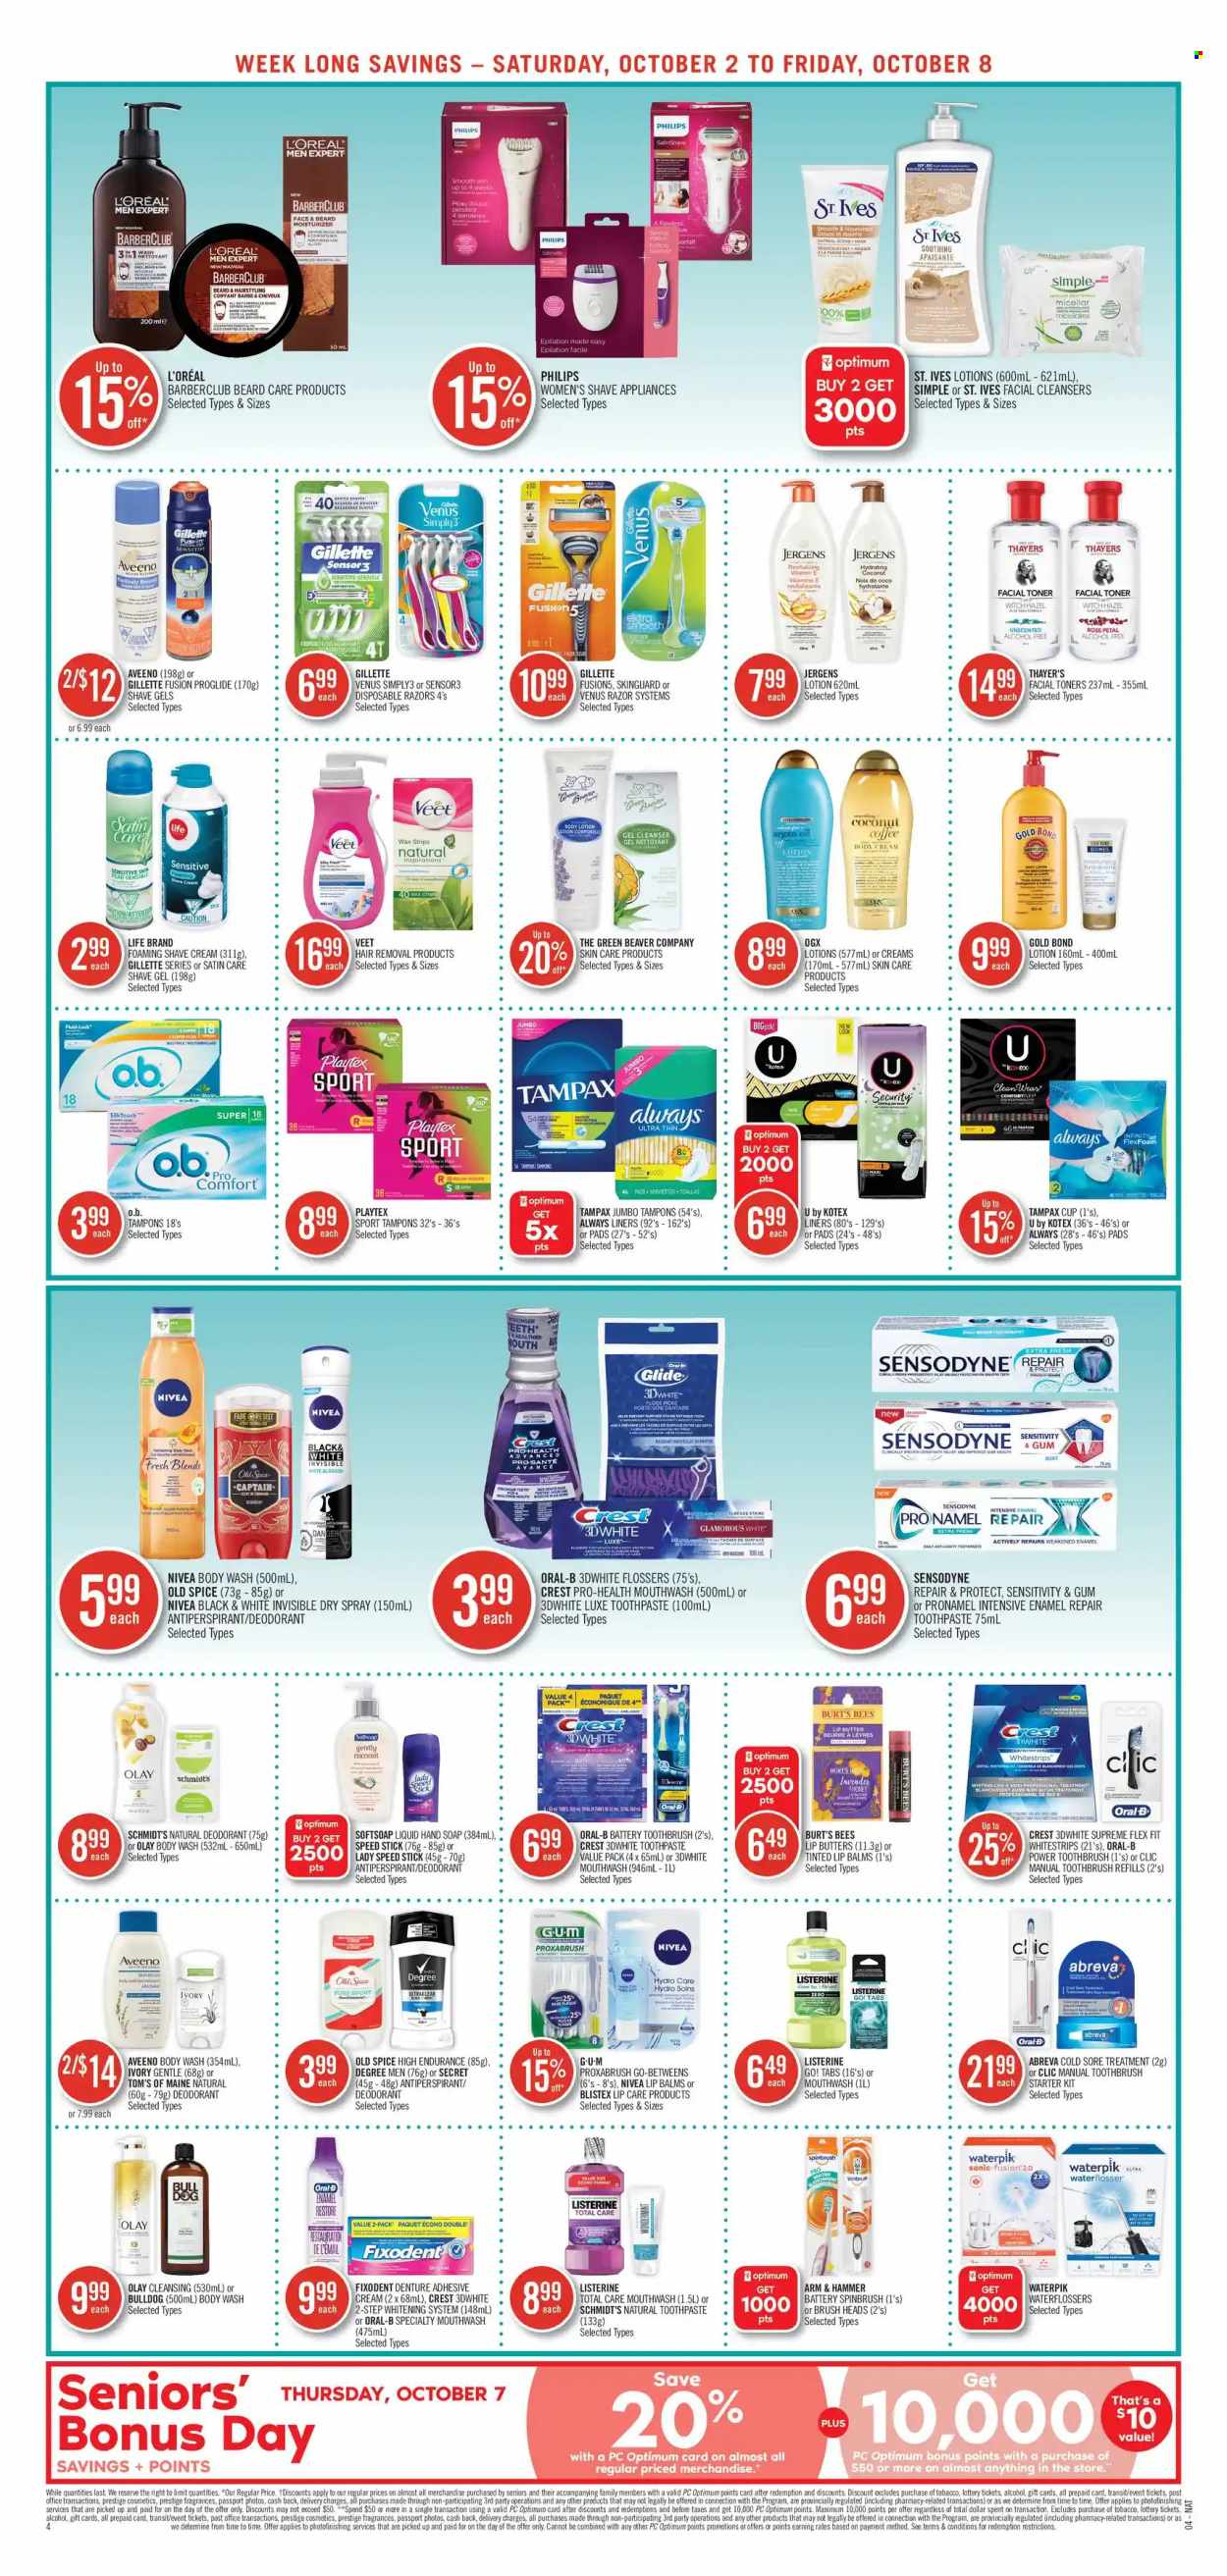 thumbnail - Shoppers Drug Mart Flyer - October 02, 2021 - October 08, 2021 - Sales products - Philips, ARM & HAMMER, spice, honey, coffee, Aveeno, Always liners, body wash, Softsoap, hand soap, soap, toothbrush, toothpaste, mouthwash, Fixodent, Crest, Playtex, Kotex, tampons, Abreva, cleanser, L’Oréal, moisturizer, Olay, L’Oréal Men, Infinity, OGX, body lotion, Jergens, anti-perspirant, Speed Stick, razor, shave gel, Venus, hair removal, Veet, wax strips, shave cream, disposable razor, pendant, argan oil, Go!, alcohol, Gillette, Listerine, Tampax, Nivea, Old Spice, Oral-B, Sensodyne, deodorant. Page 4.